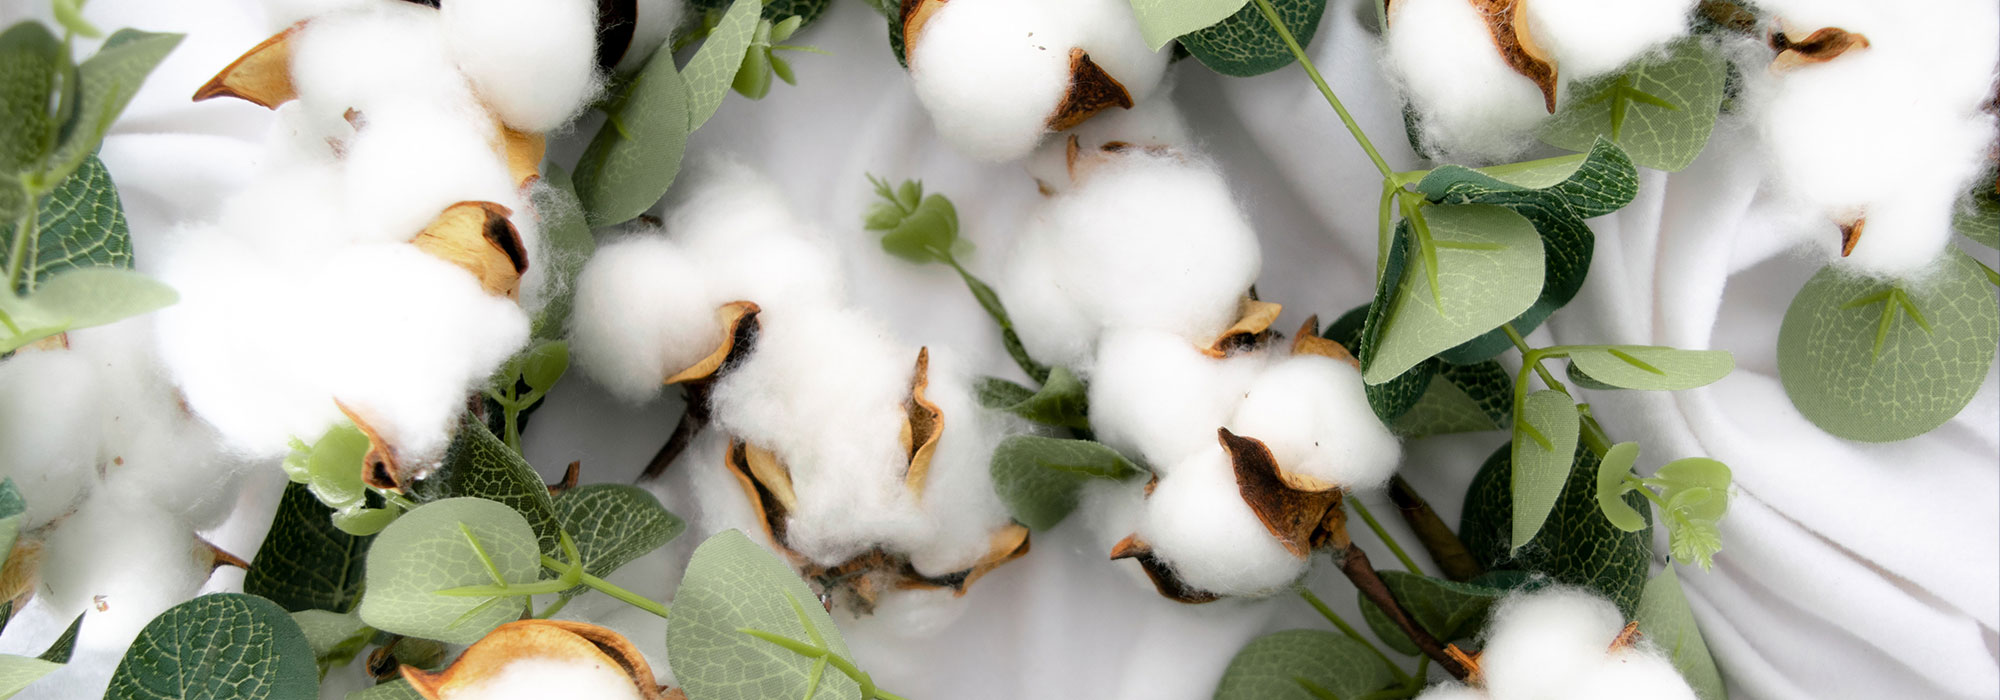 In-conversion cotton: moving together towards a sustainable future